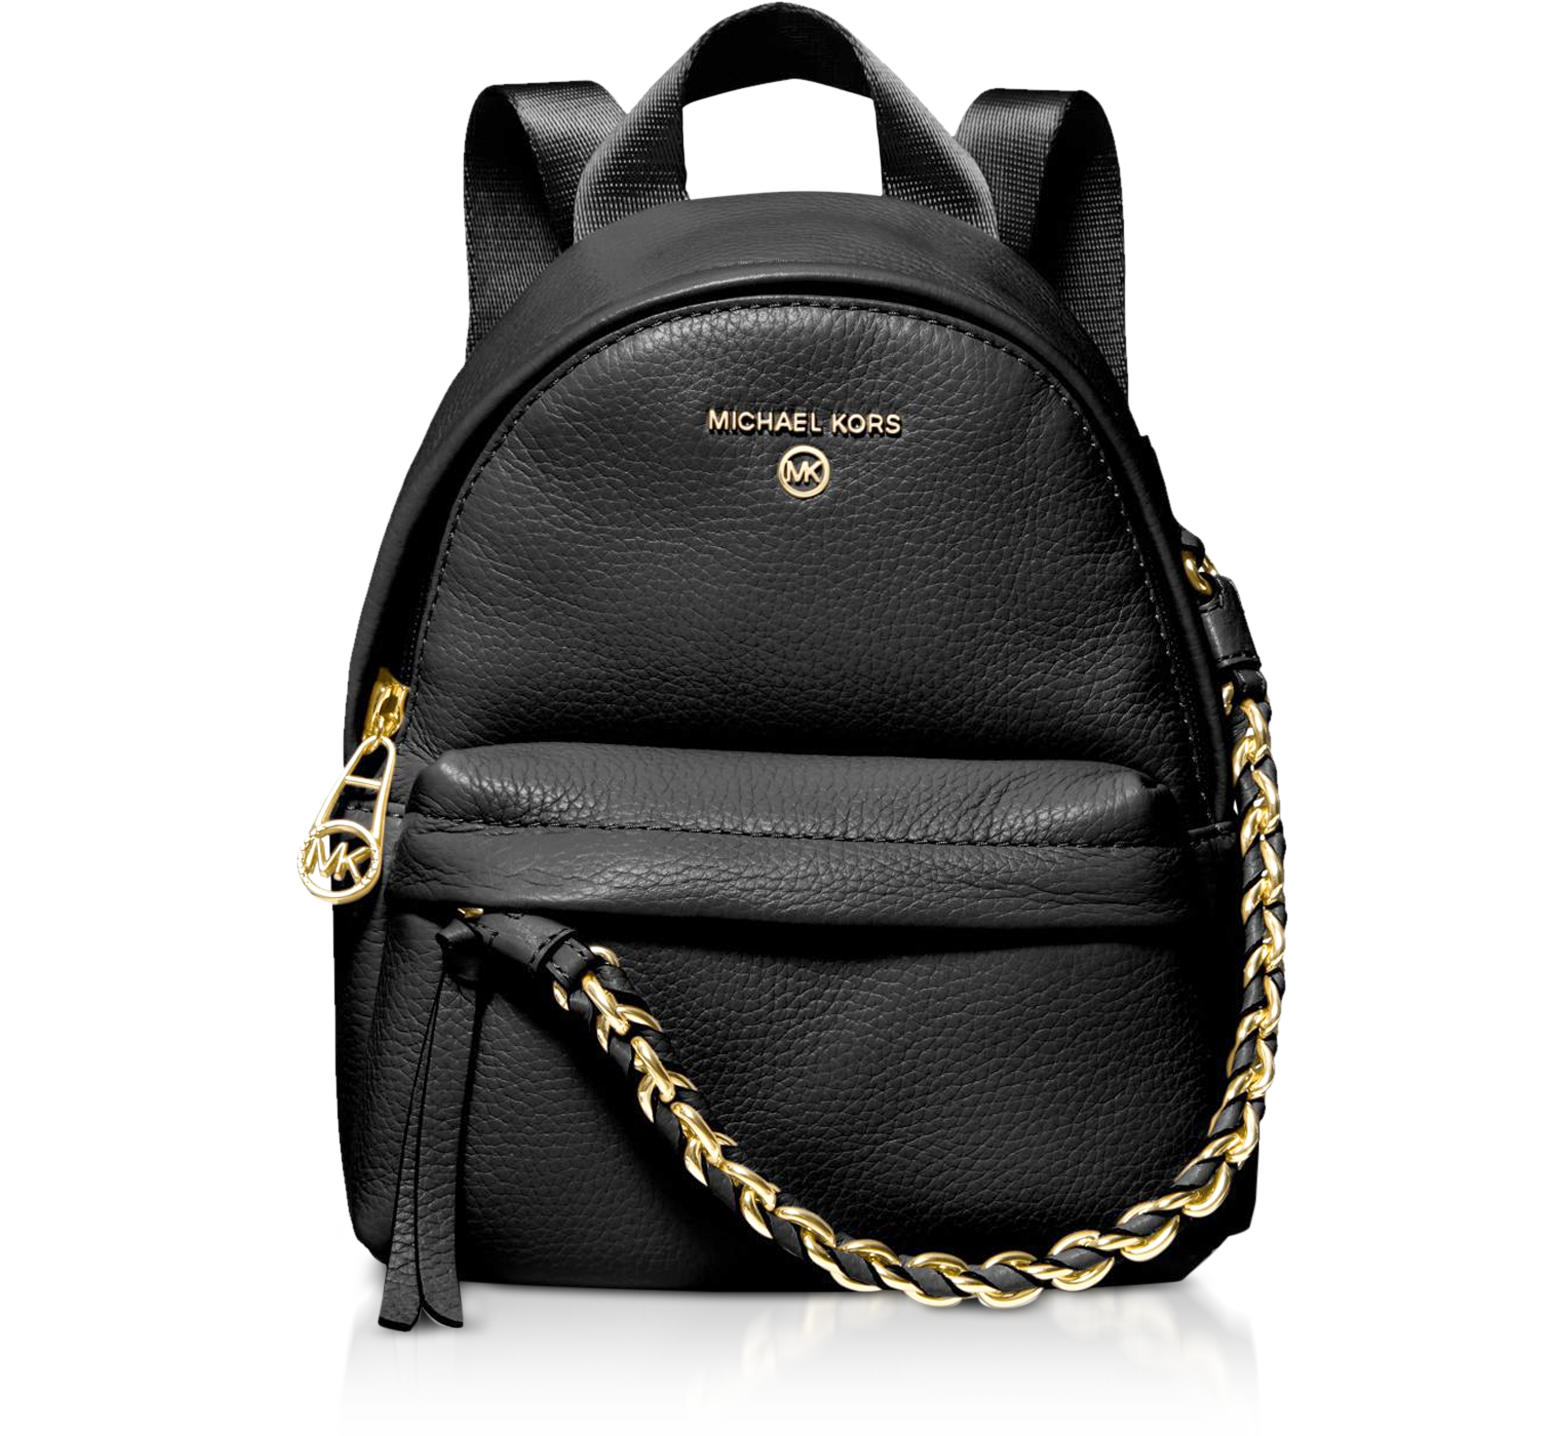 Michael Kors Black Slater Extra-Small Pebbled Leather Convertible Backpack  at FORZIERI